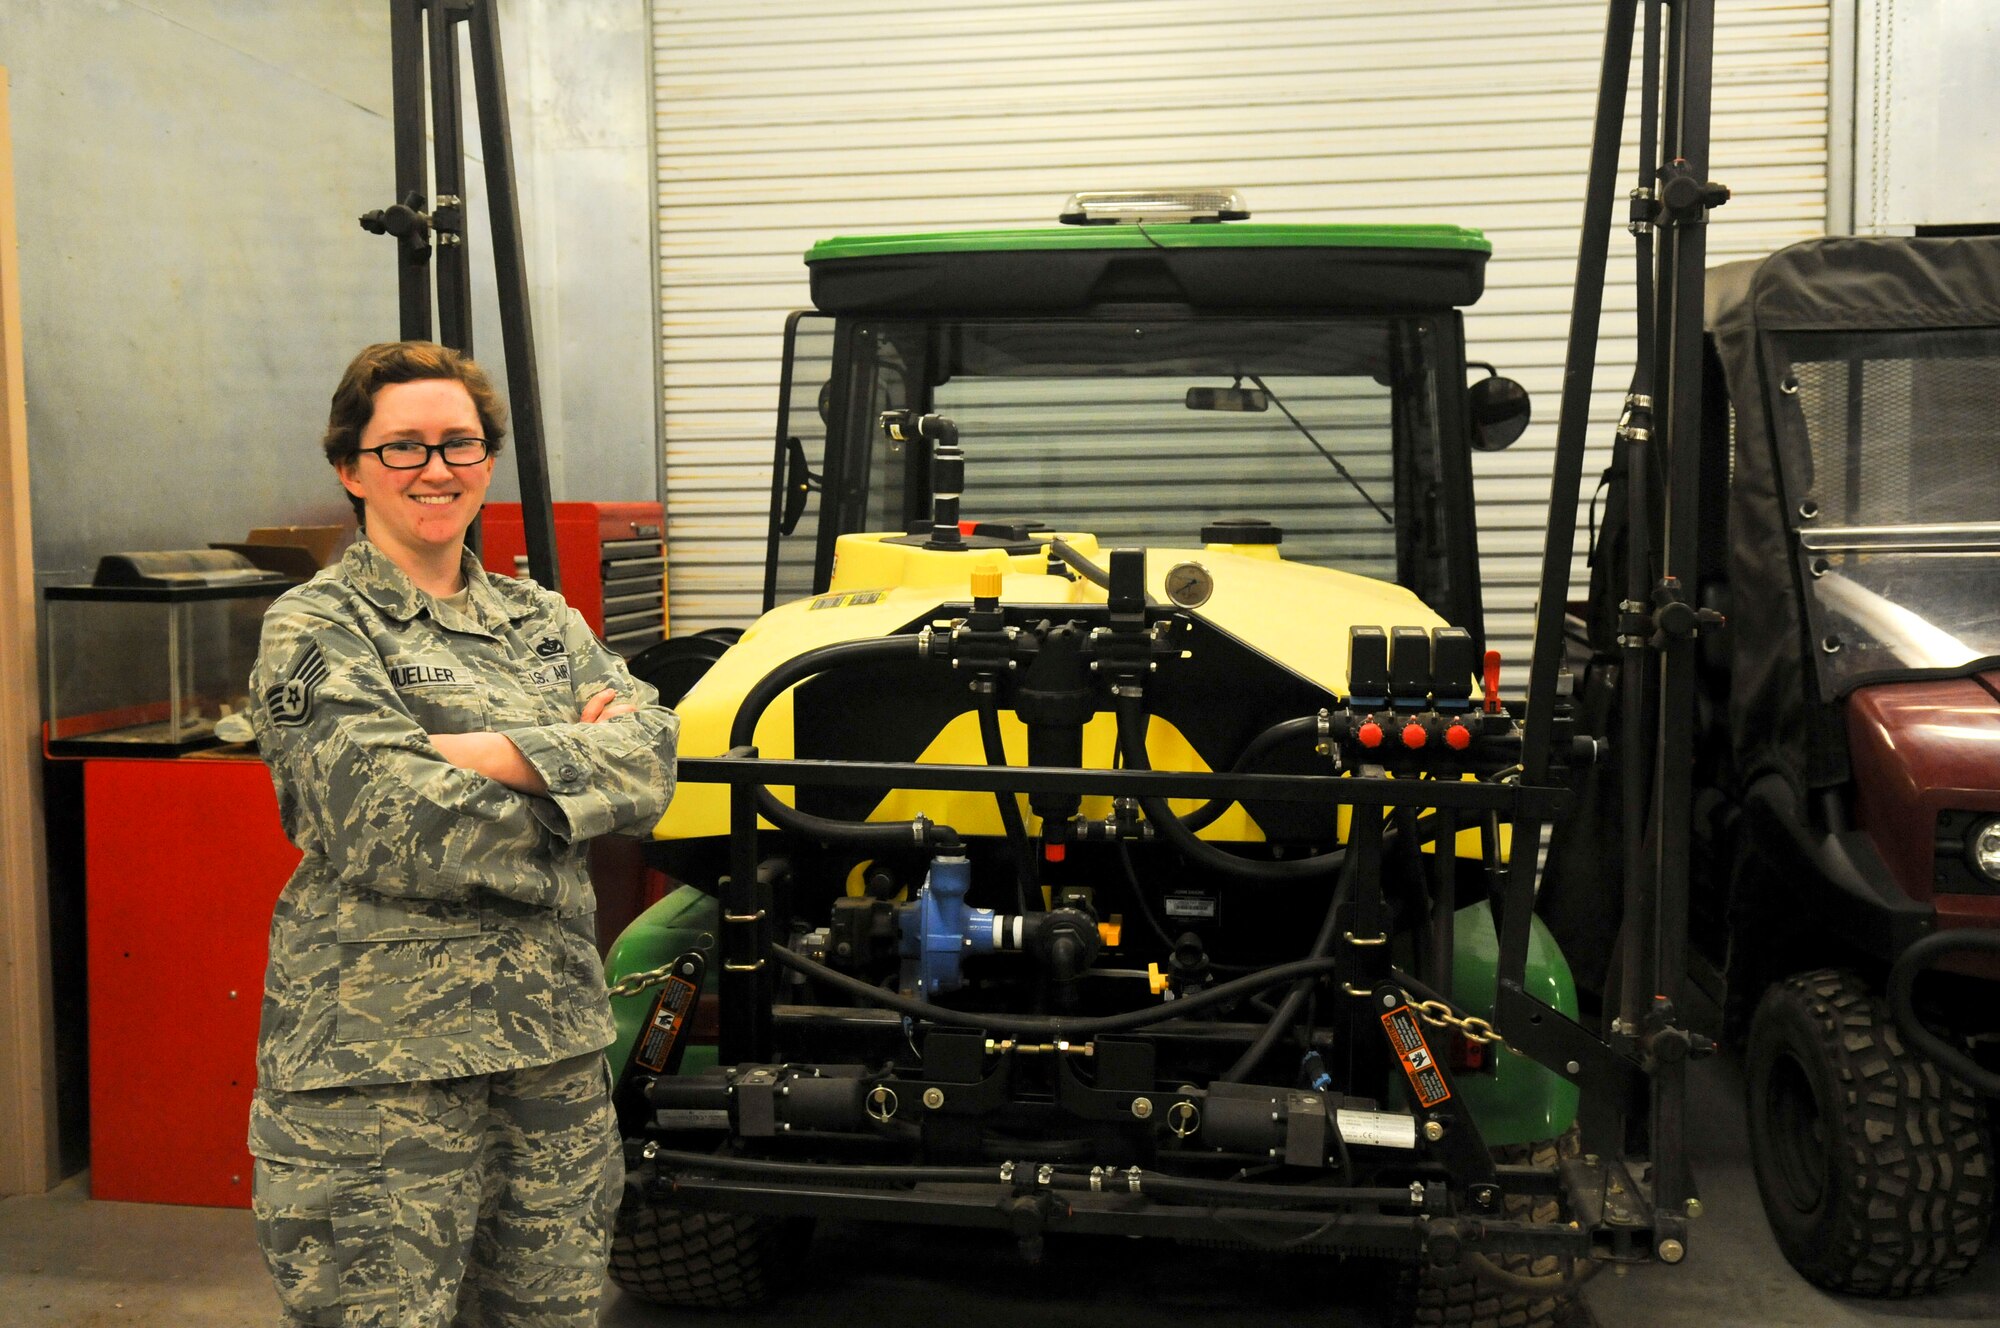 Staff Sgt. Kassandra Mueller, 9th Civil Engineering Squadron pest management craftsman Mar. 28, 2016, at Beale Air Force Base, California. CE utilizes a multitude of equipment to combat environmental hazards. (U.S. Air Force photo by Senior Airman Michael J. Hunsaker)